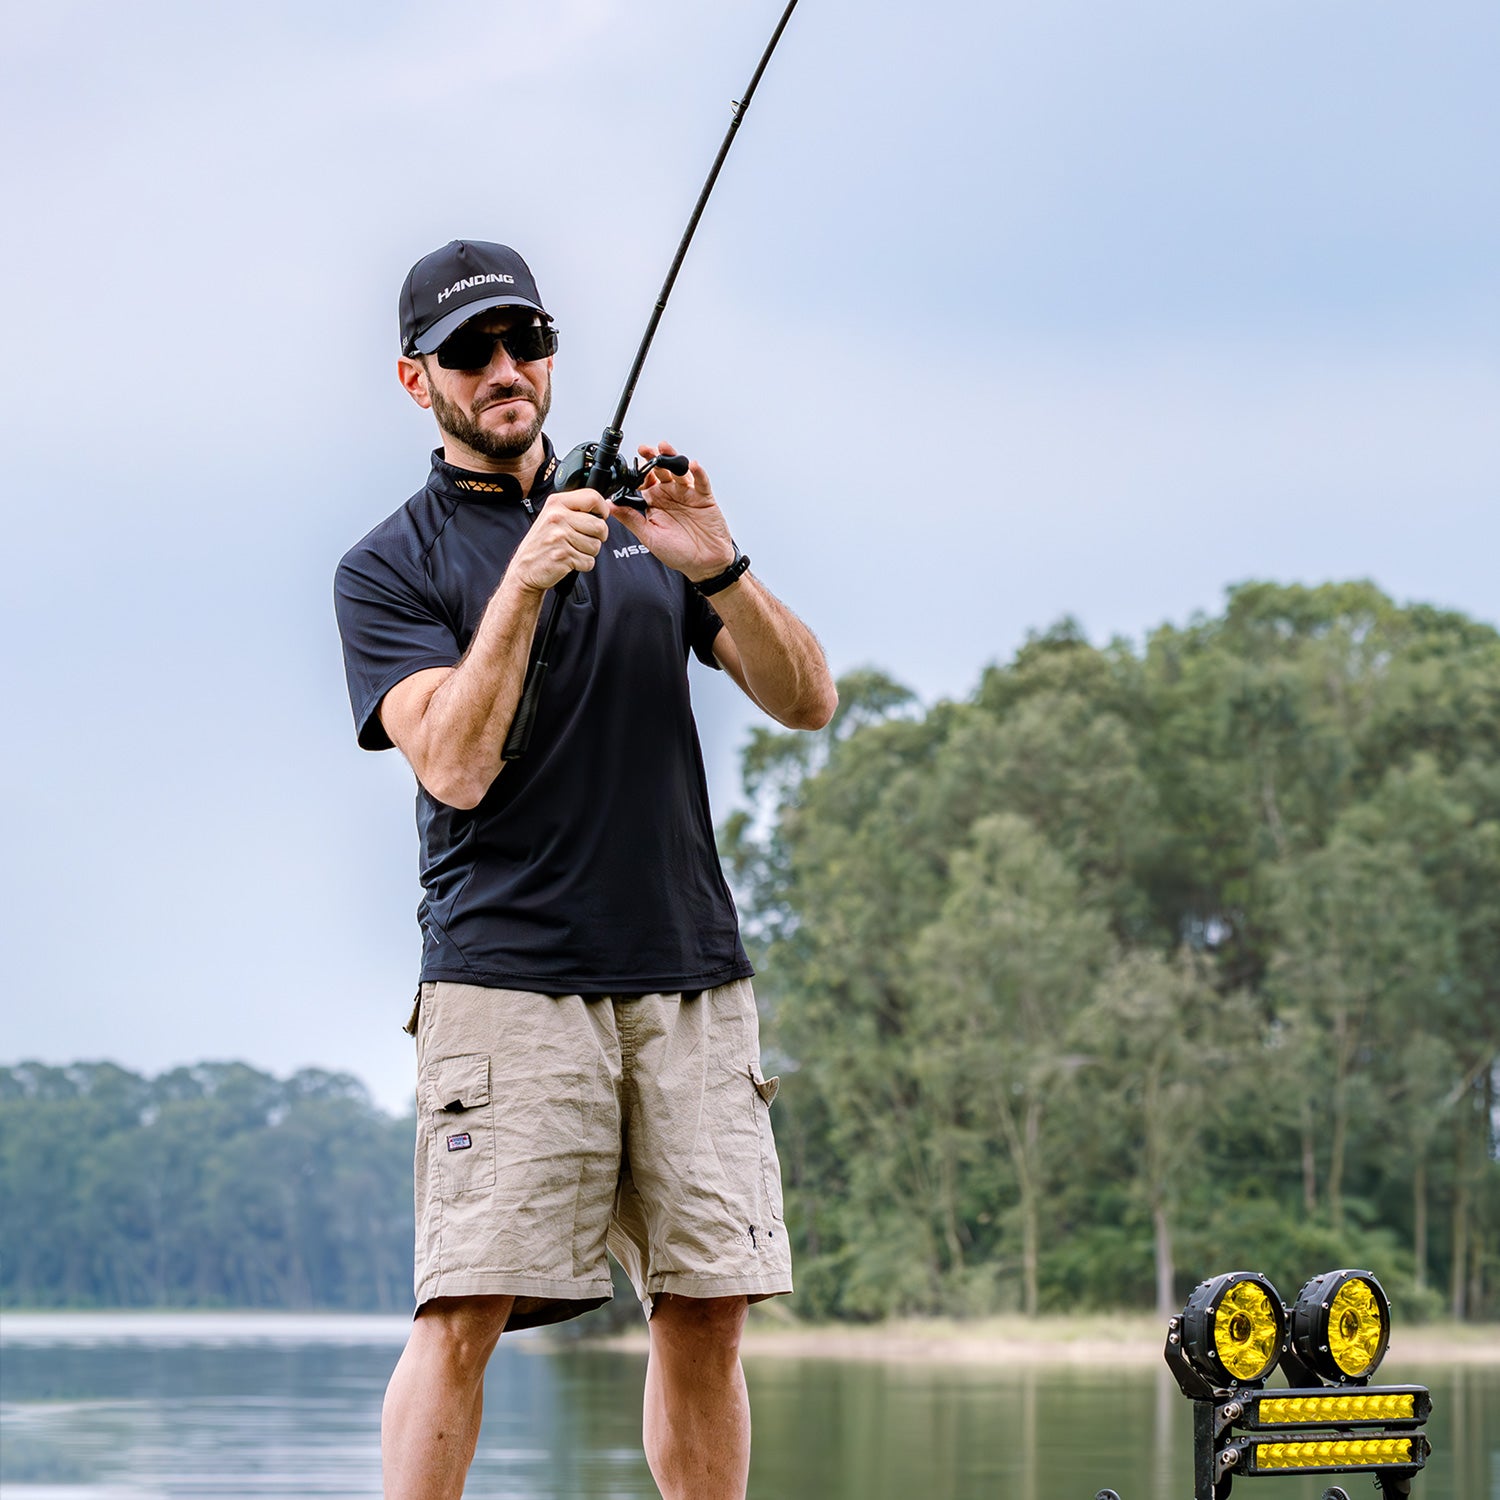 HANDING M1 BFS casting fishing rod provides all day comfort